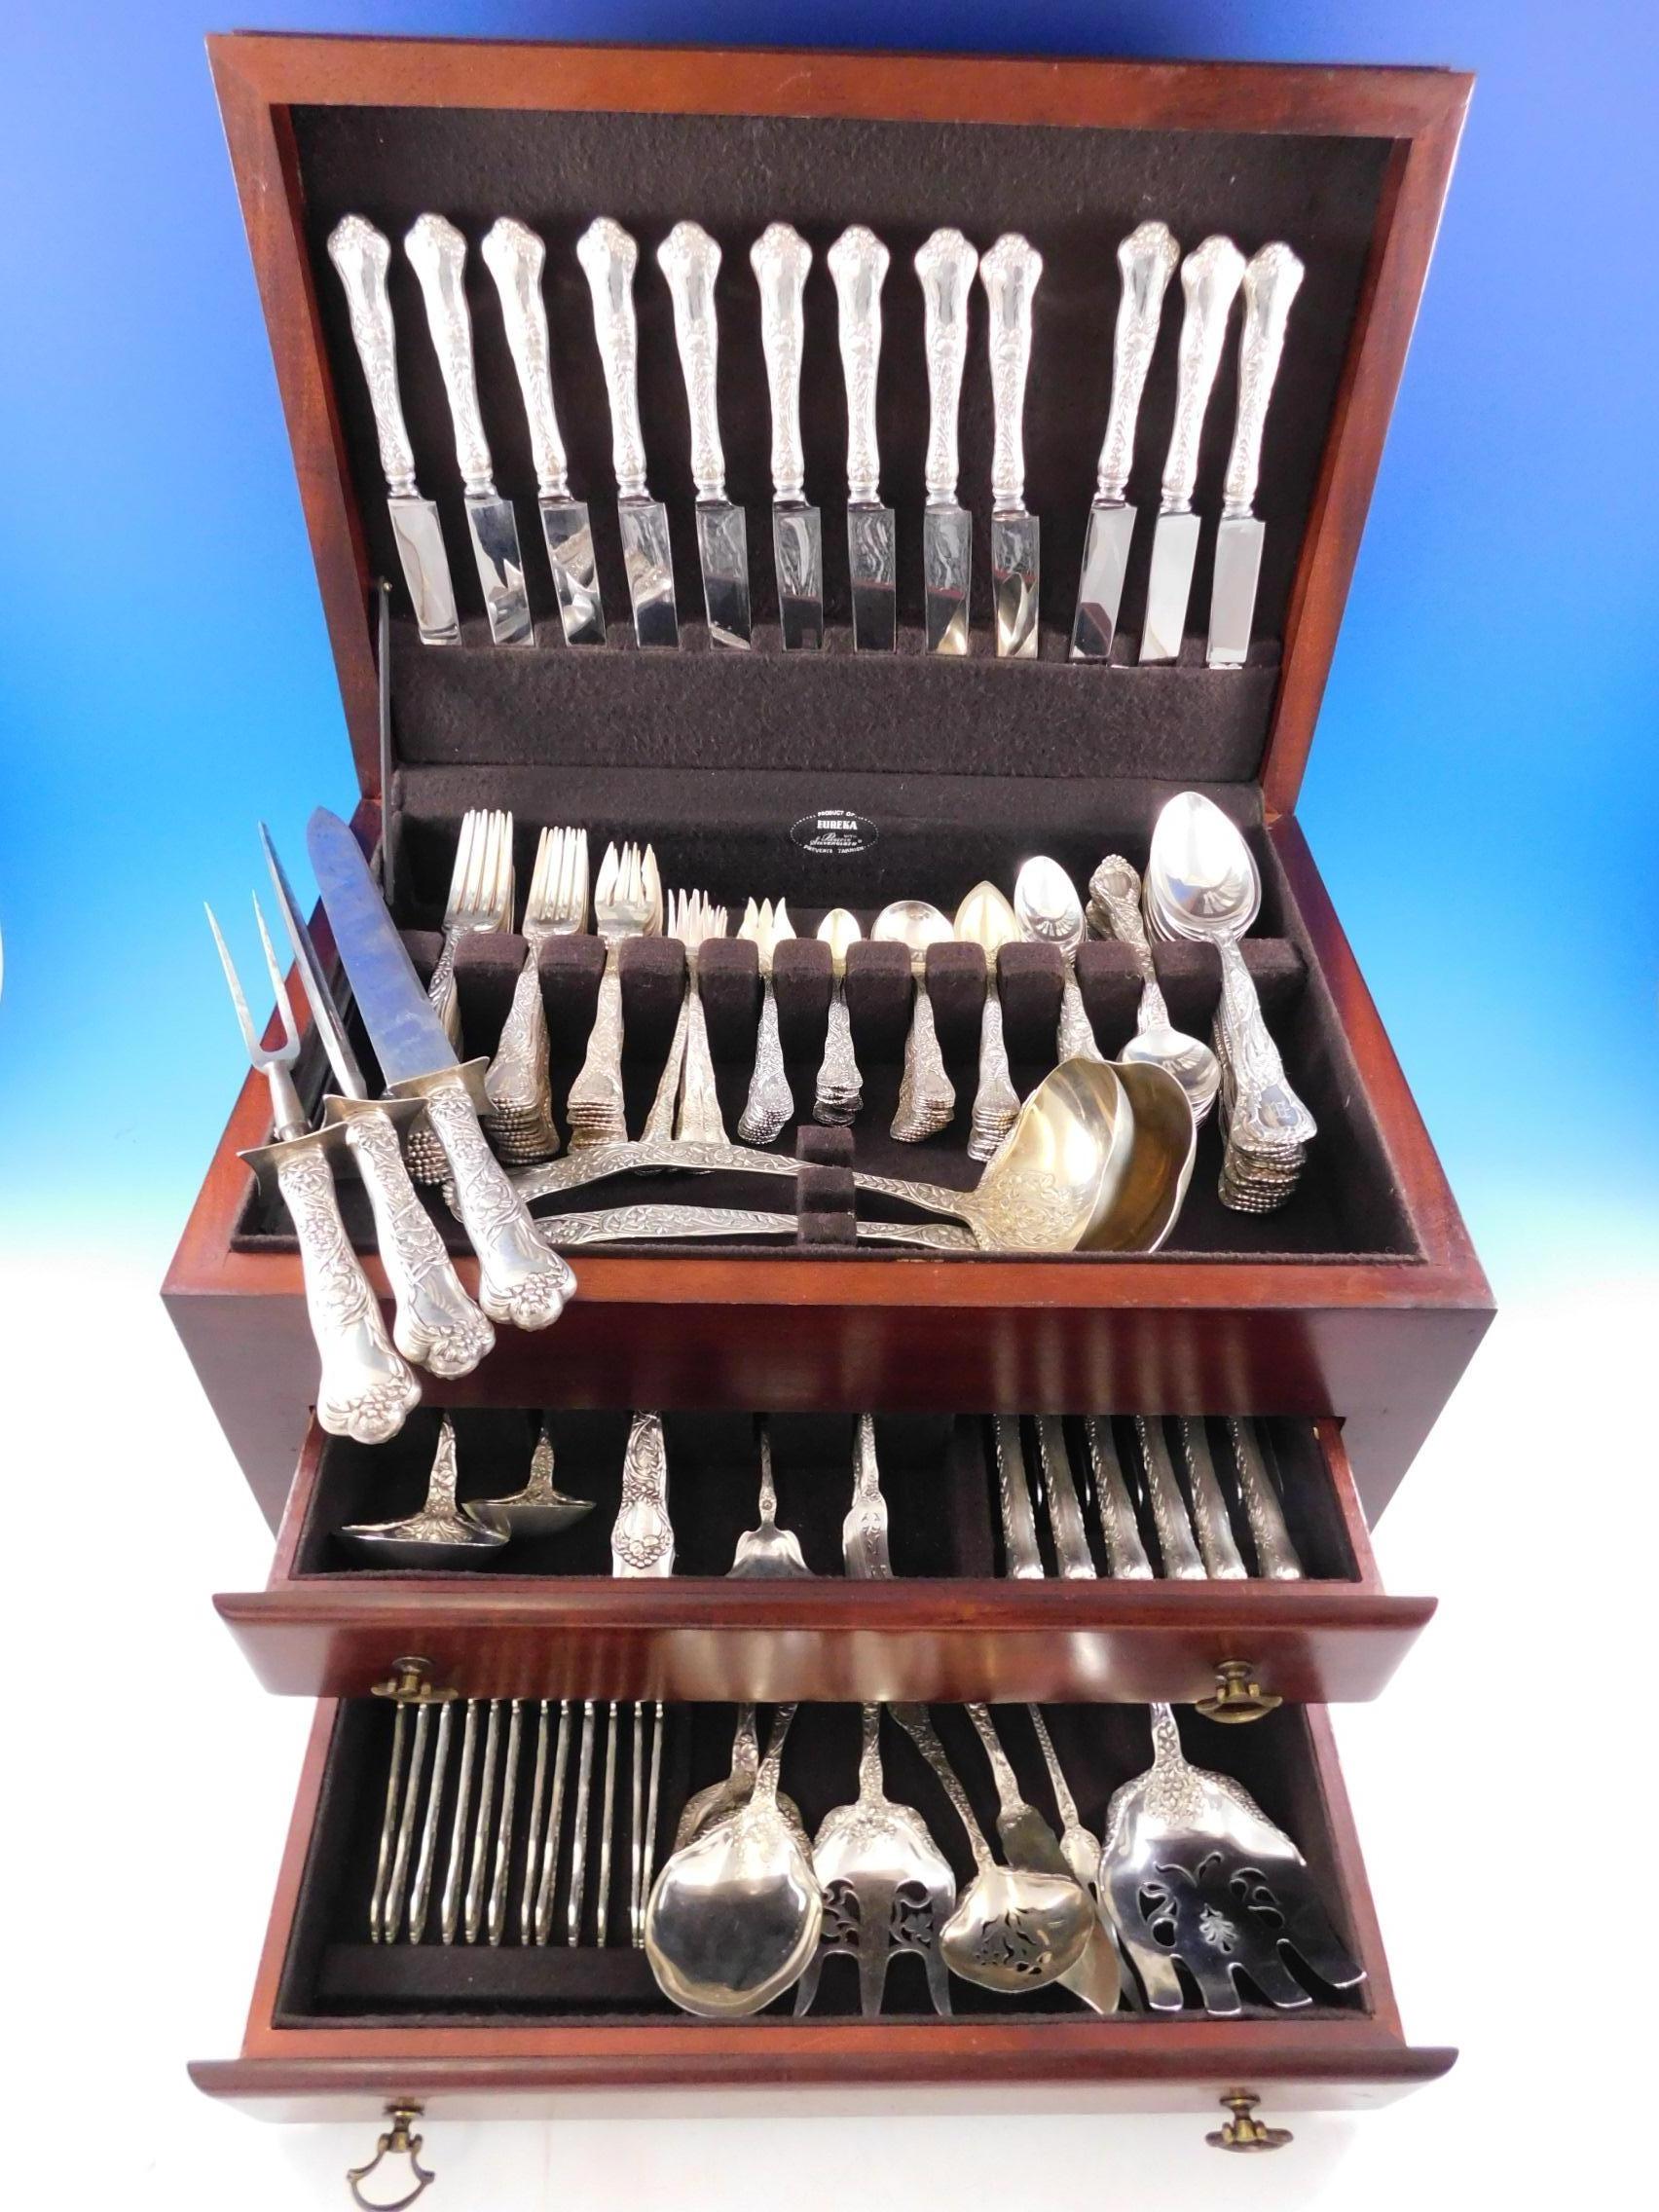 Superb Meadow by Gorham sterling silver Flatware set - 198 pieces including many fabulous serving pieces. This multi-motif pattern features various finely detailed scenes of flowers, cattails, clover, grasses, and foliage found in the American